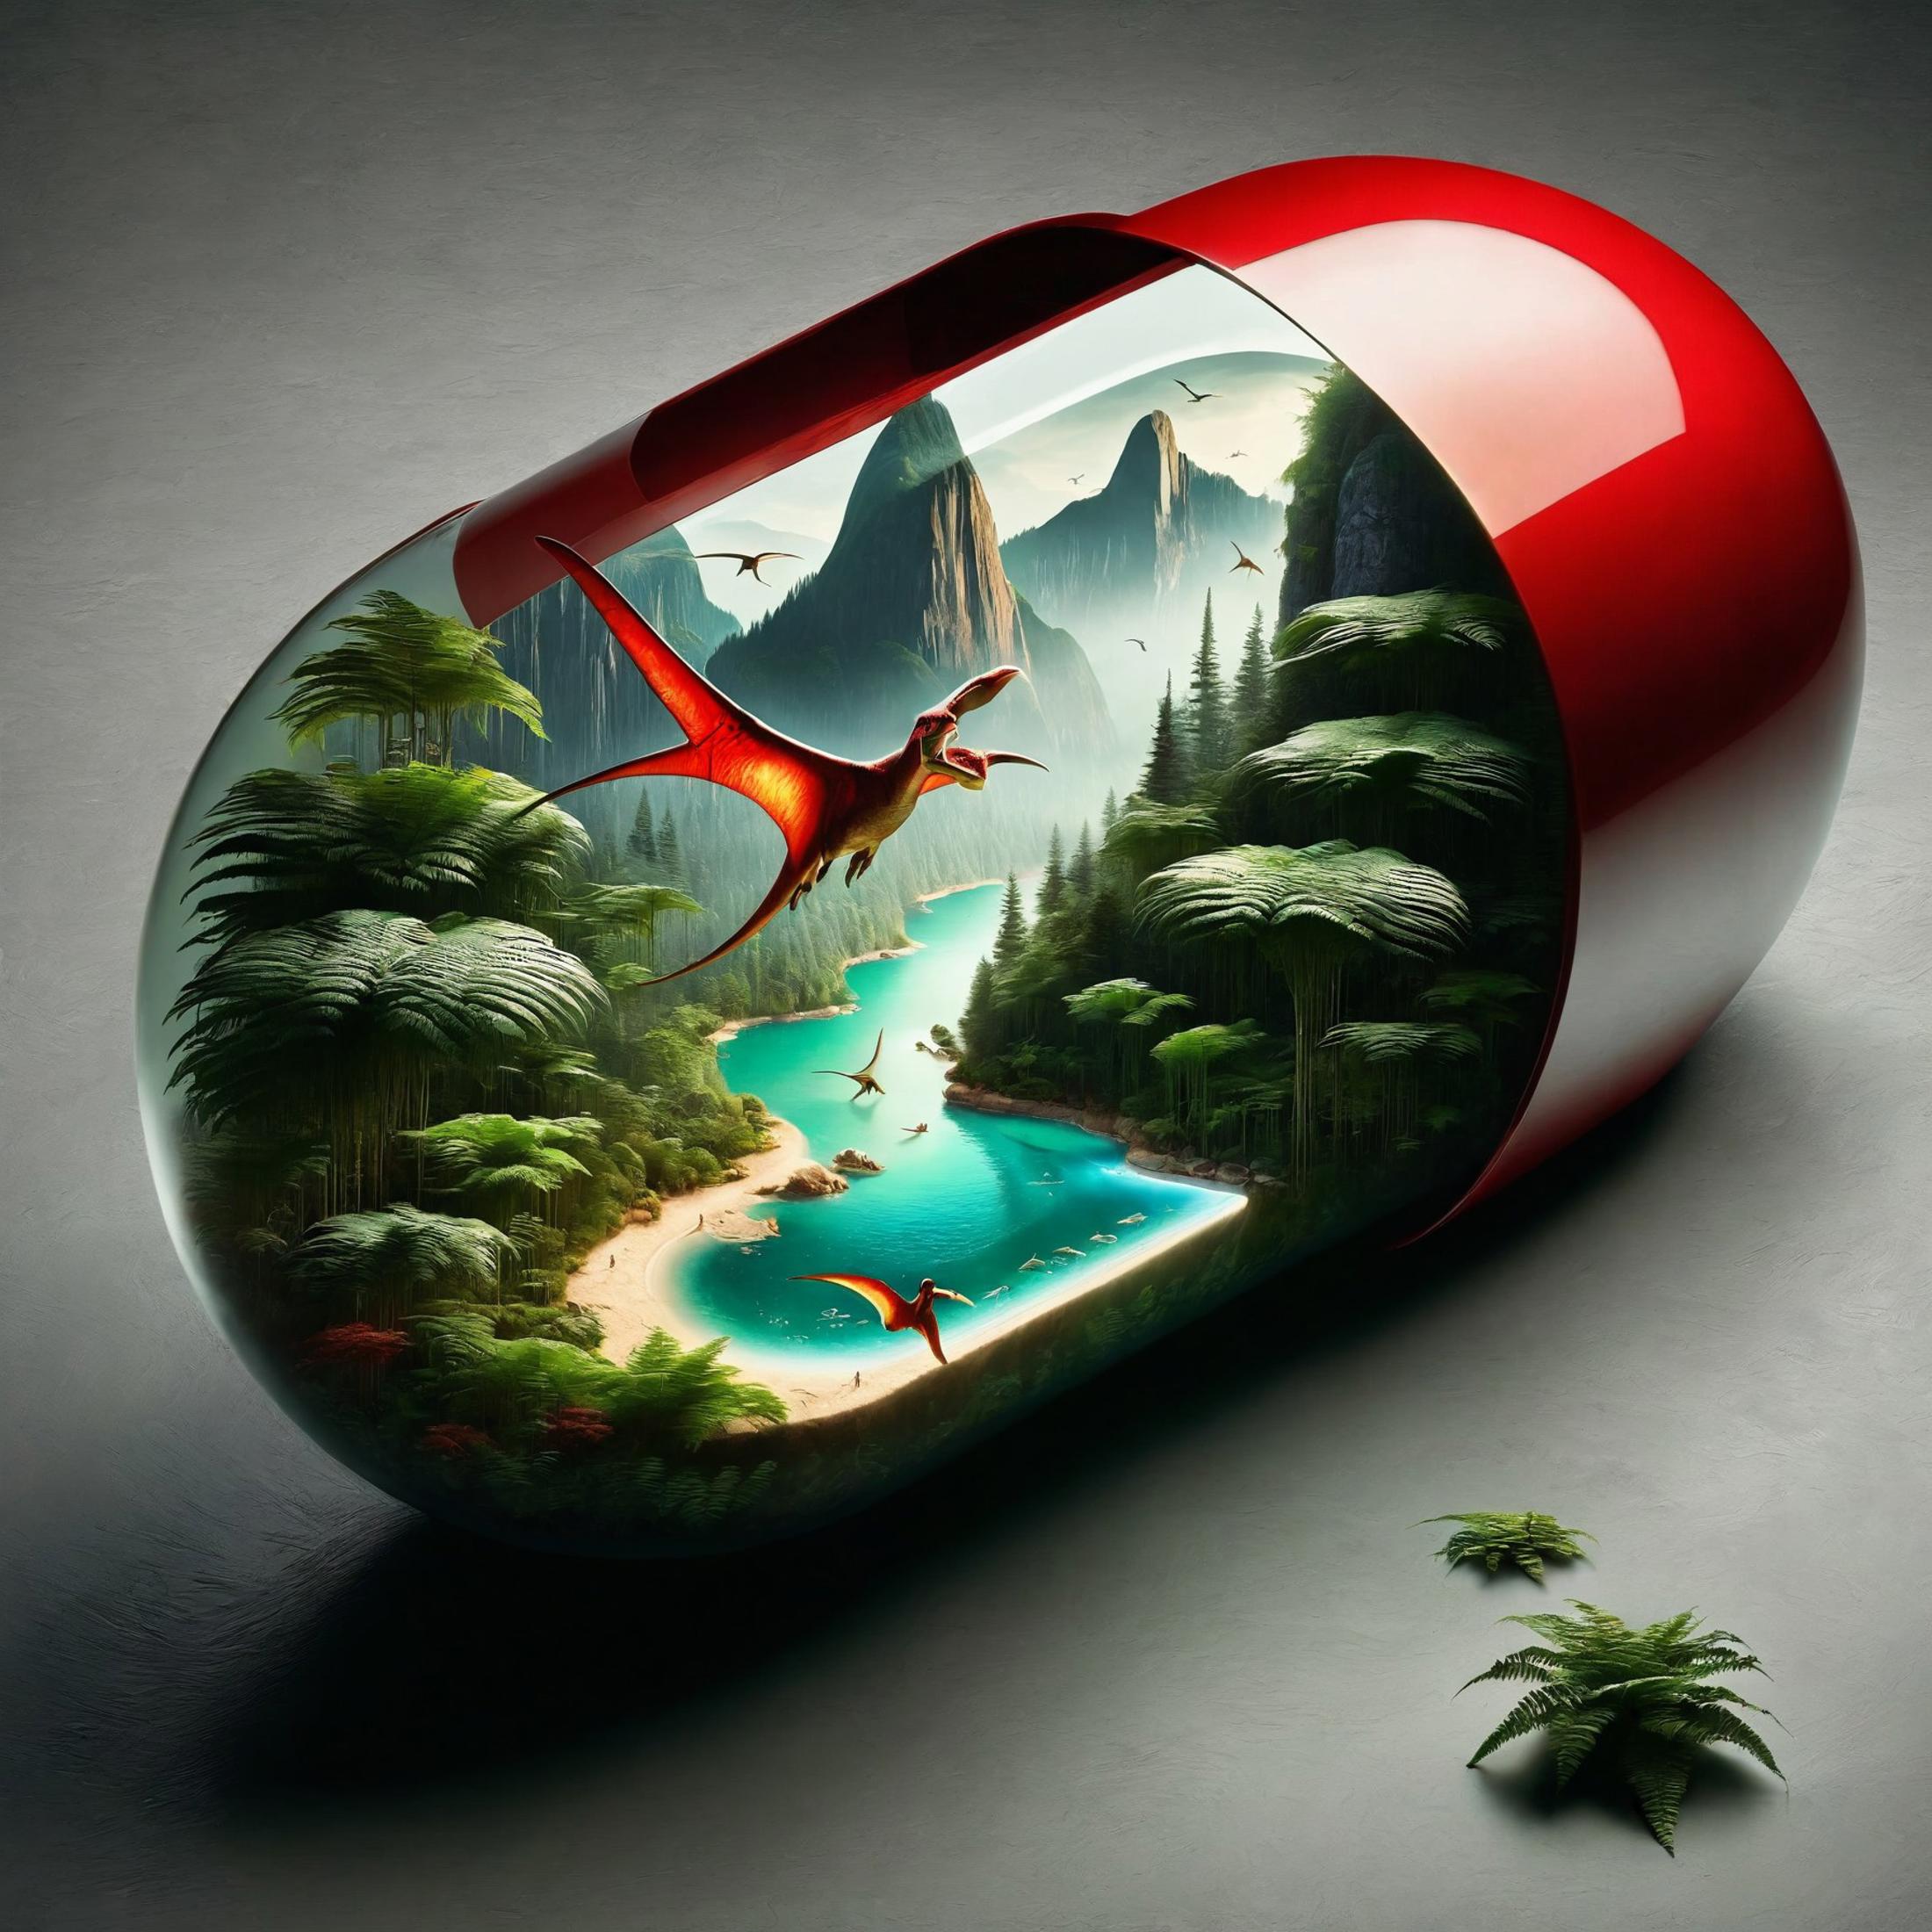 A red pill bottle with a scene of dinosaurs and a waterfall painted on it.